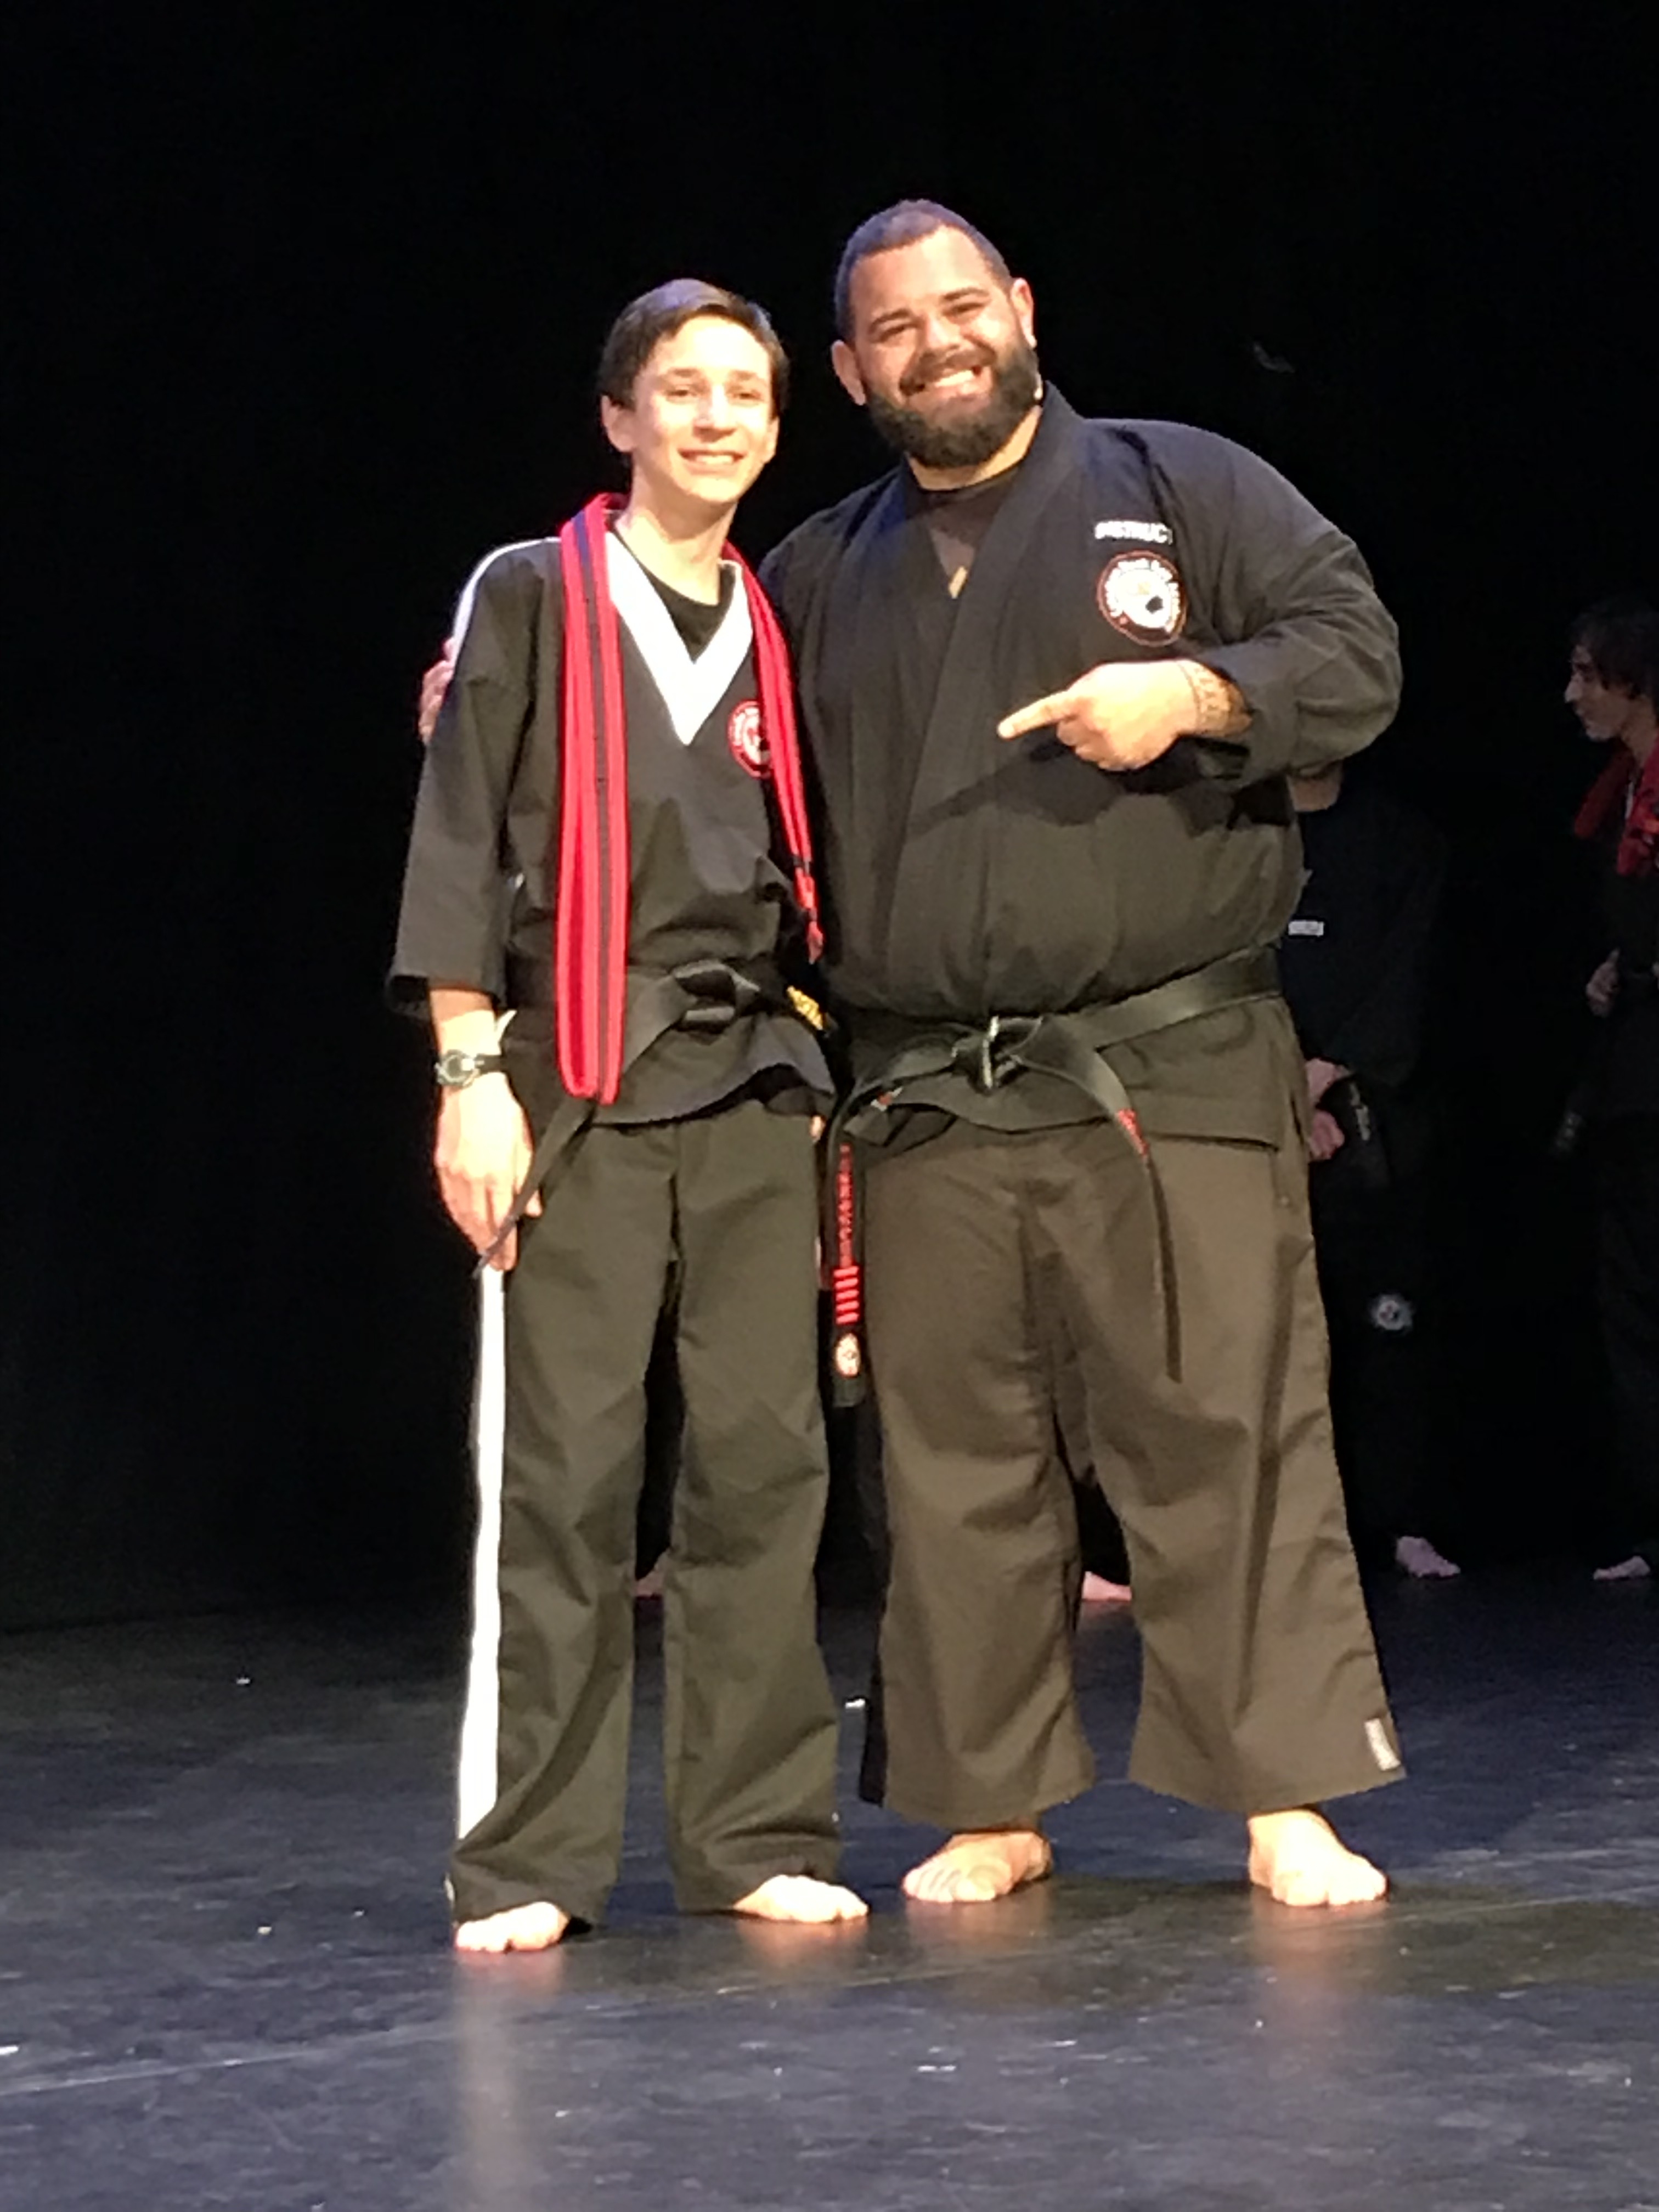 Me with my first-degree black belt